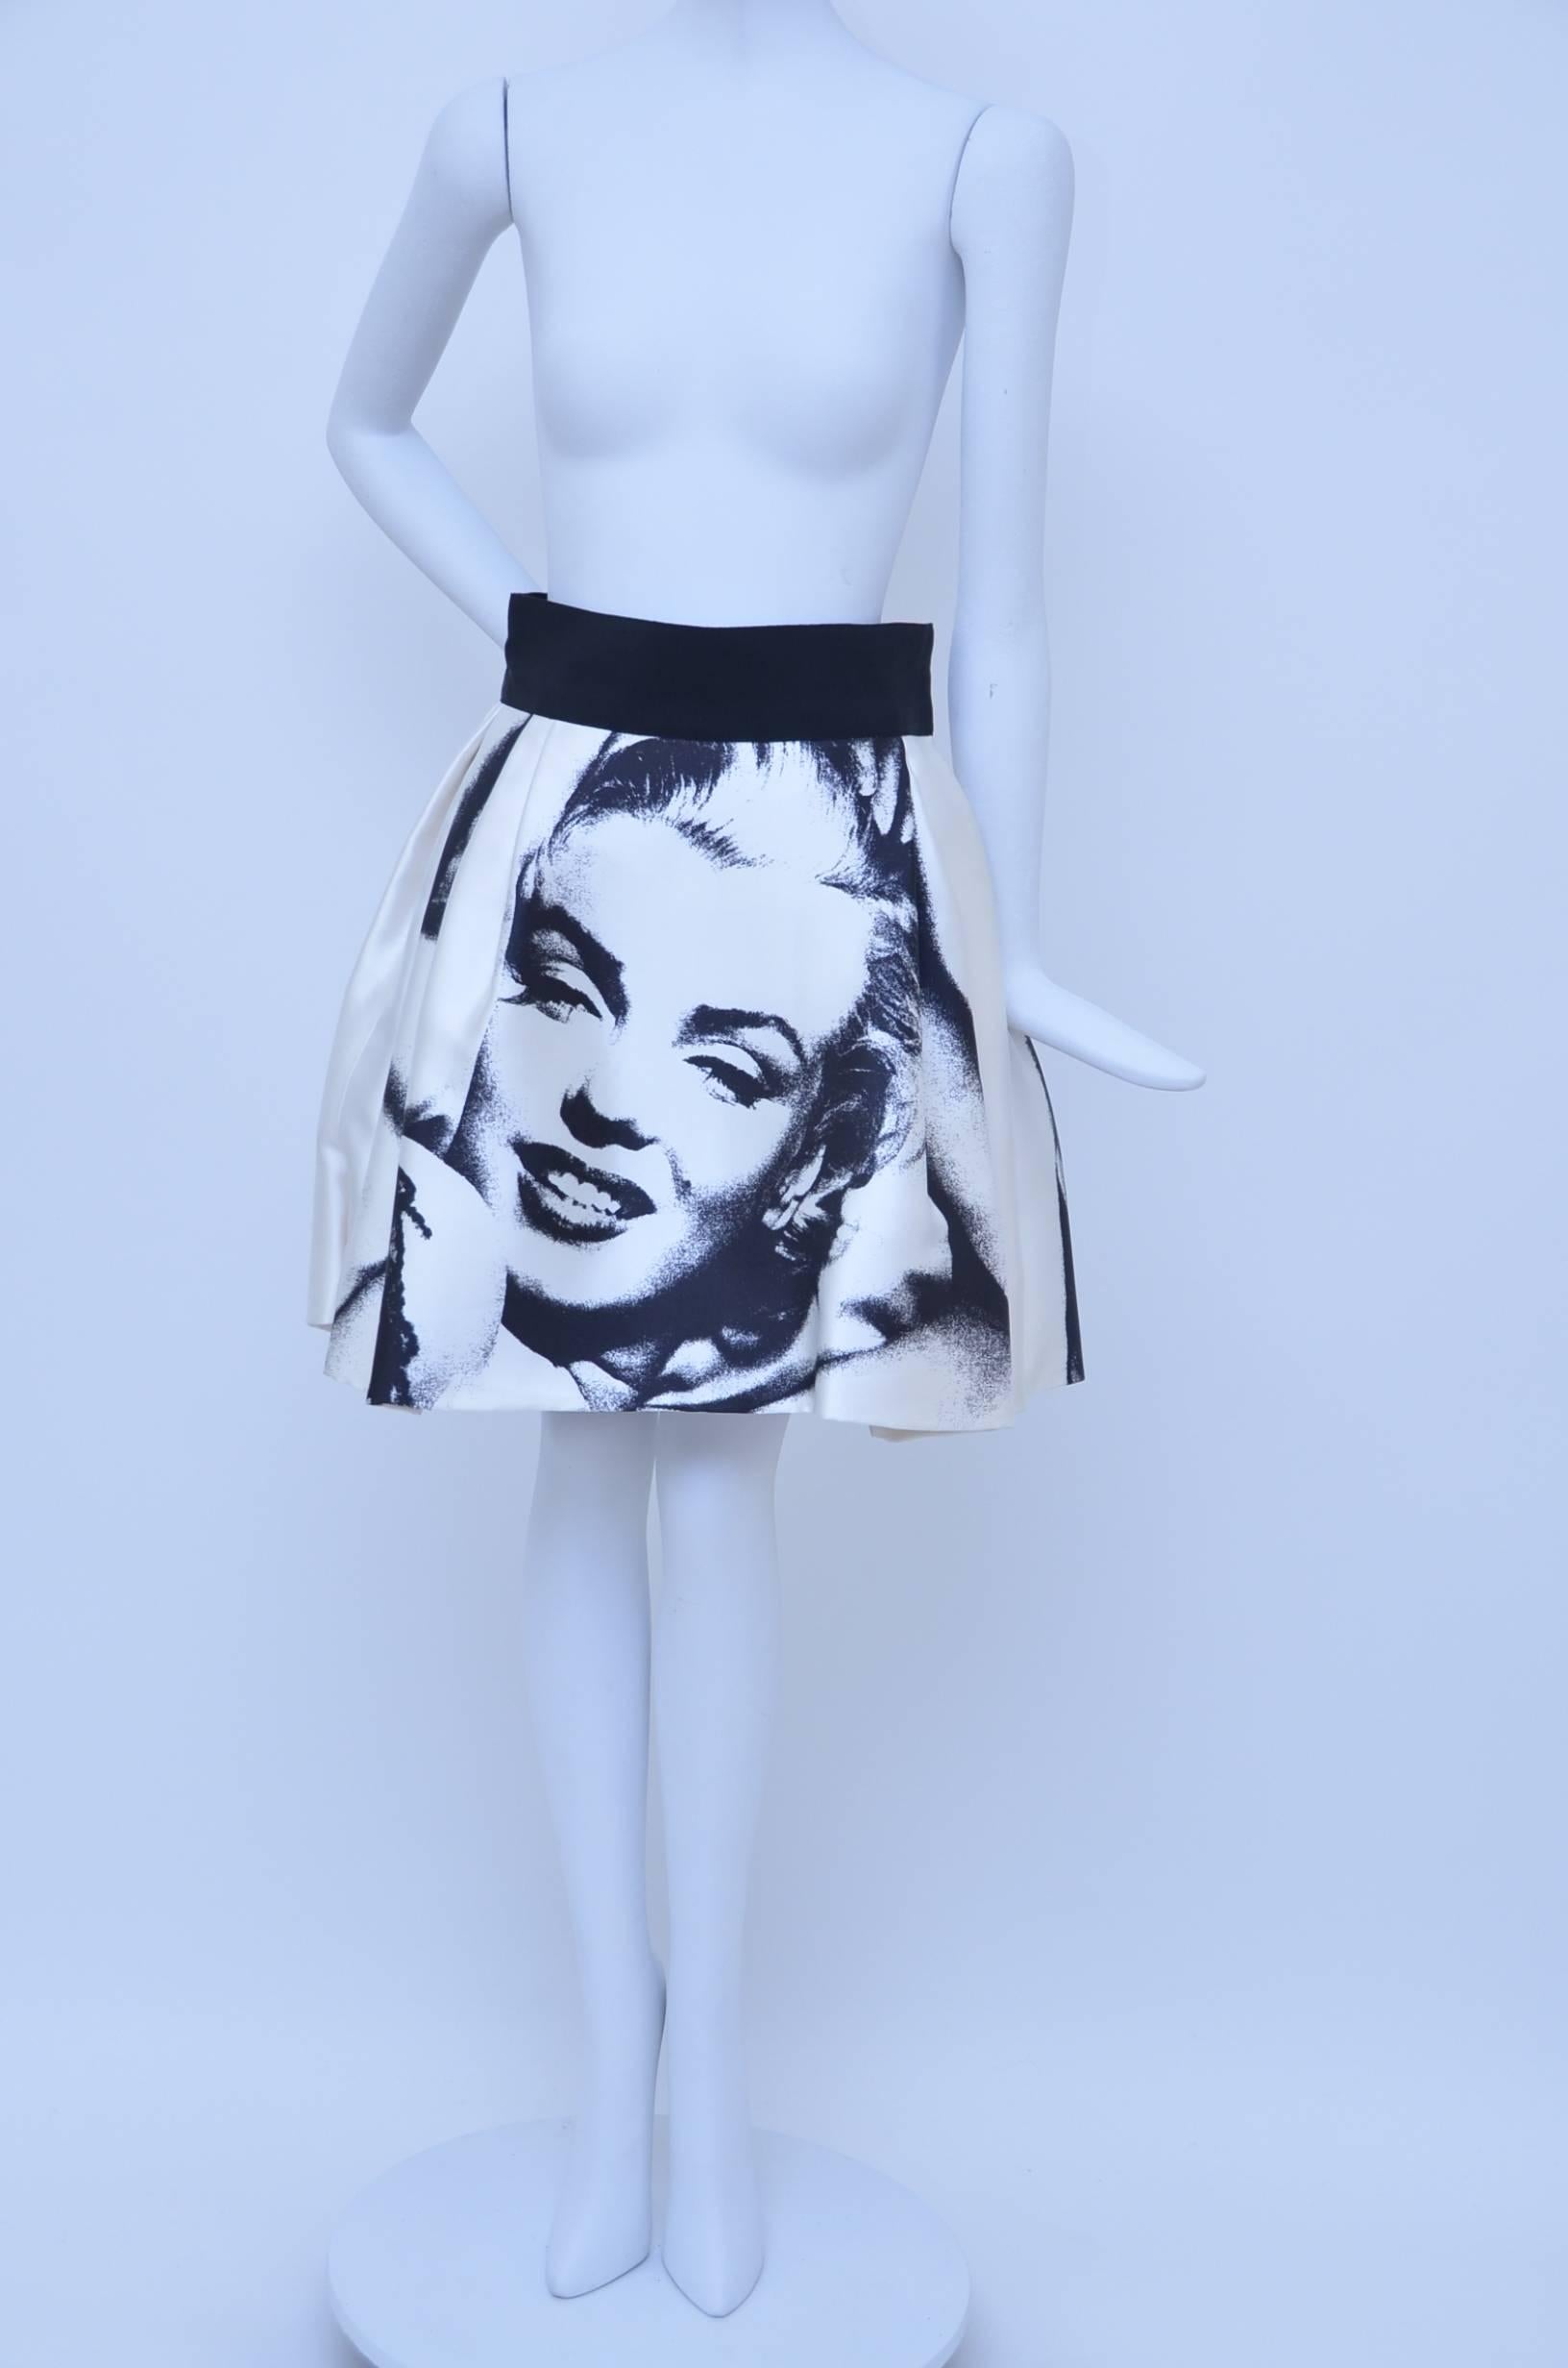 Dolce & Gabbana Marilyn Monroe printed skirt.
Heavy silk fabric doubled up and black skirt underneath  to create more fullness and volume.
Measurements: Waist 26”, Hip 44”, Length 19.5”
Fabric Content: 100% Silk, Lining: 60% Silk, 40%